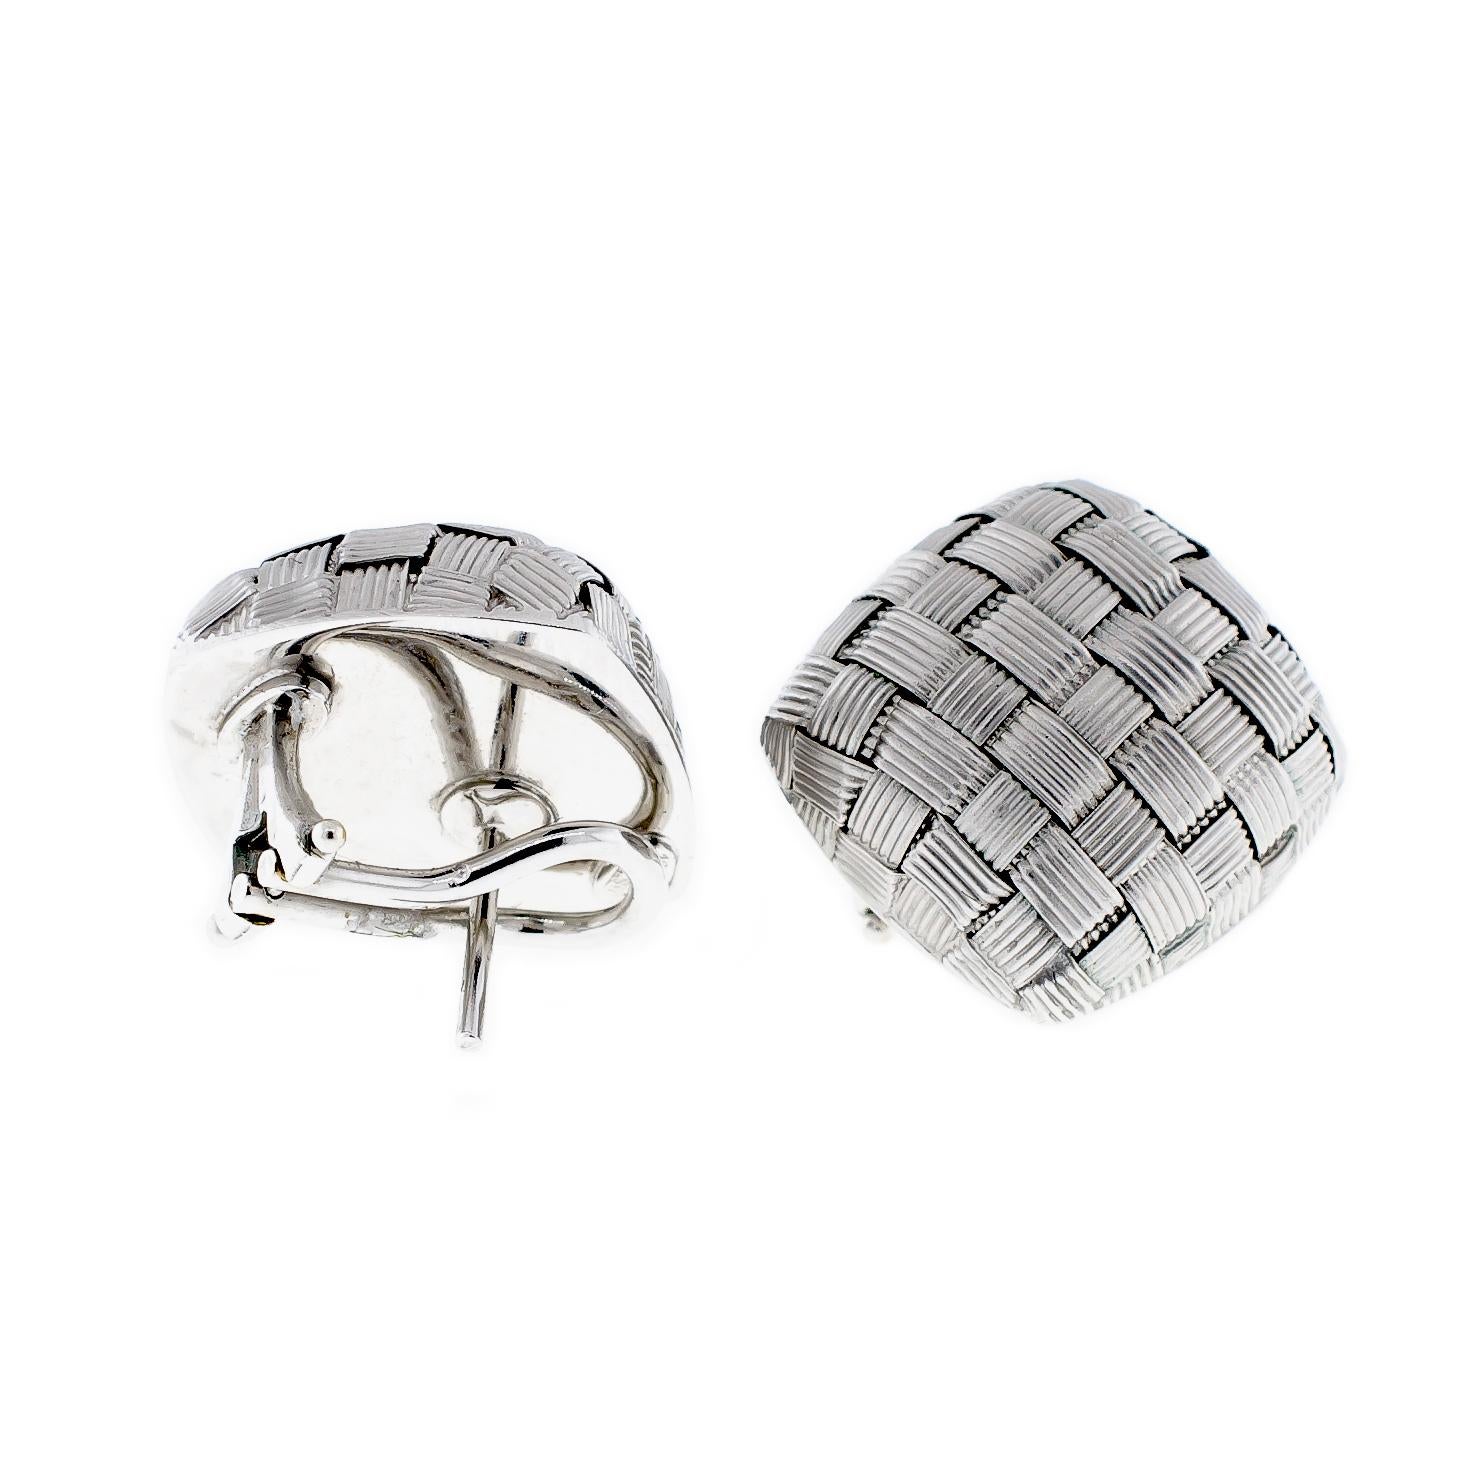 Contemporary Pair of Roberto Coin 18 Karat White Gold Appassionata Earclips